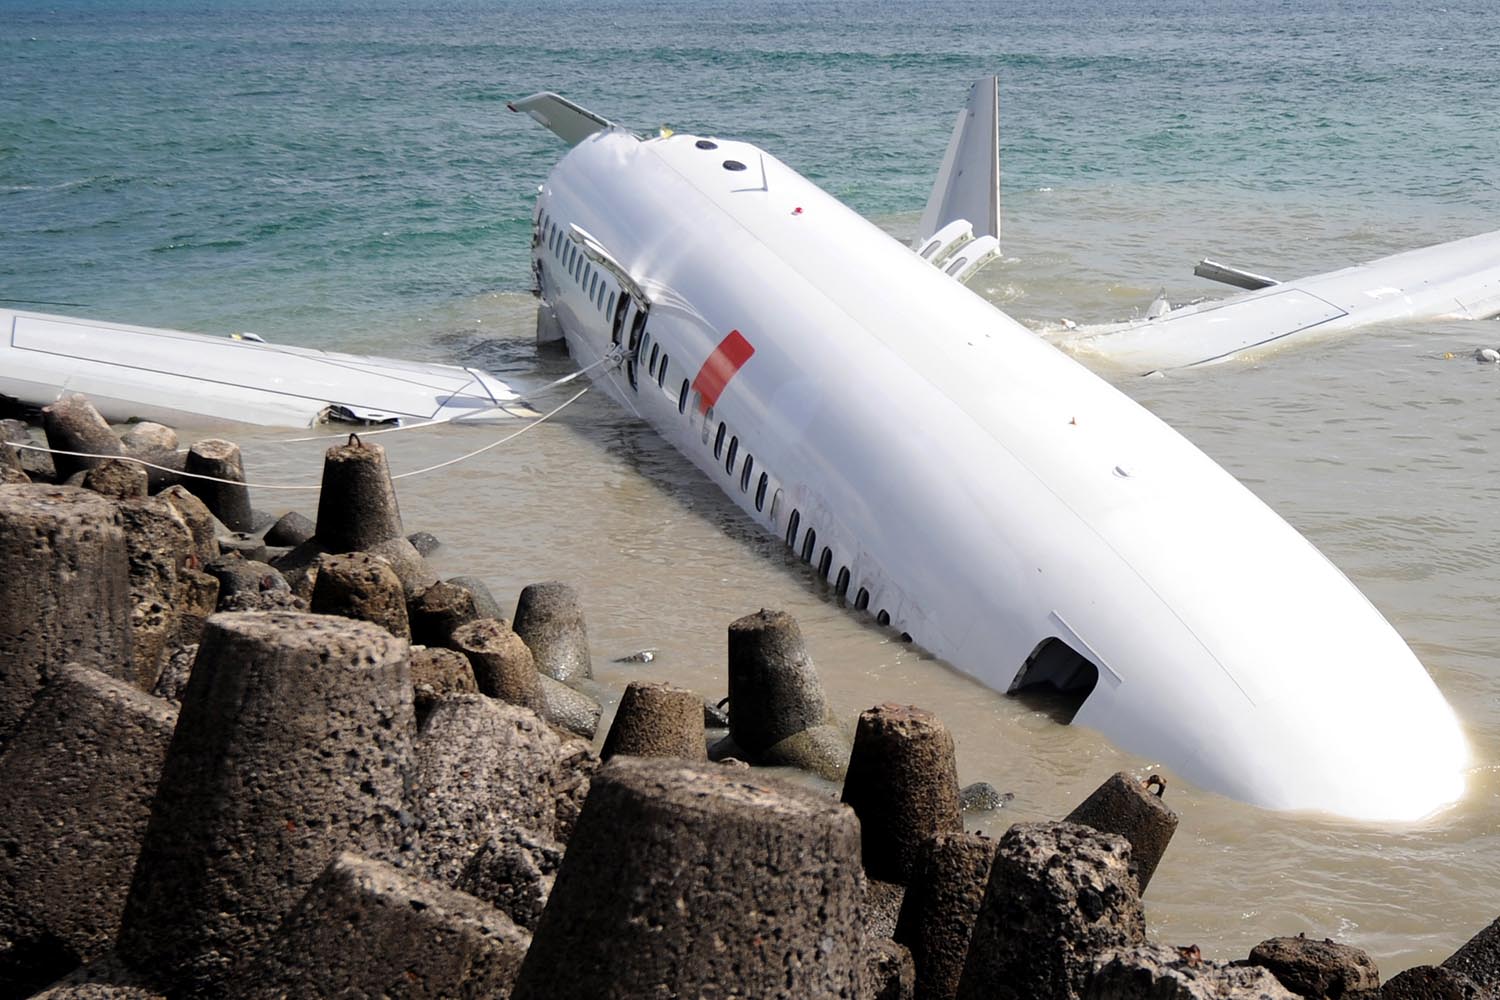 April 16, 2013. A Lion Air Boeing 737 lies partially submerged in the water two days after it crashed on landing at Bali's international airport near Denpasar.